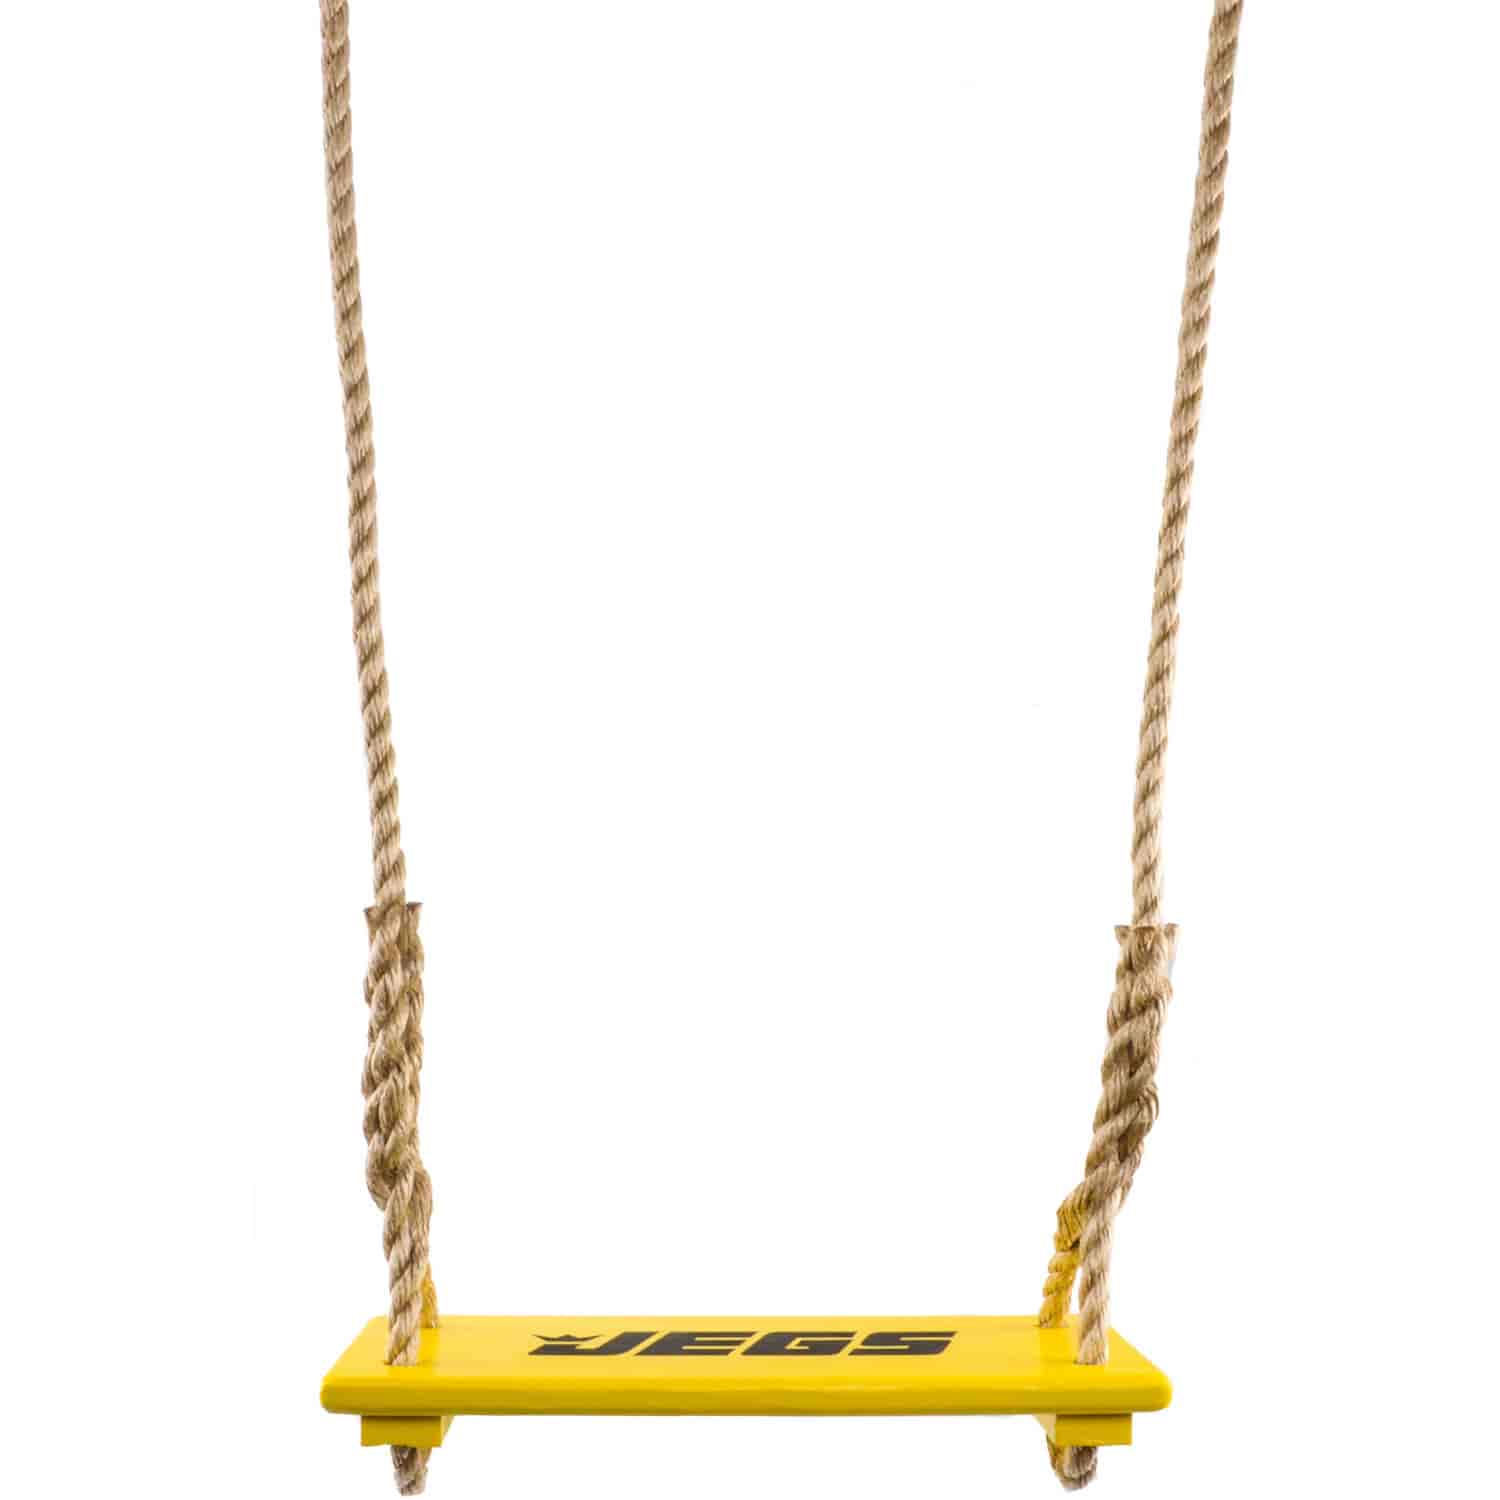 Wooden Swing Childs Size